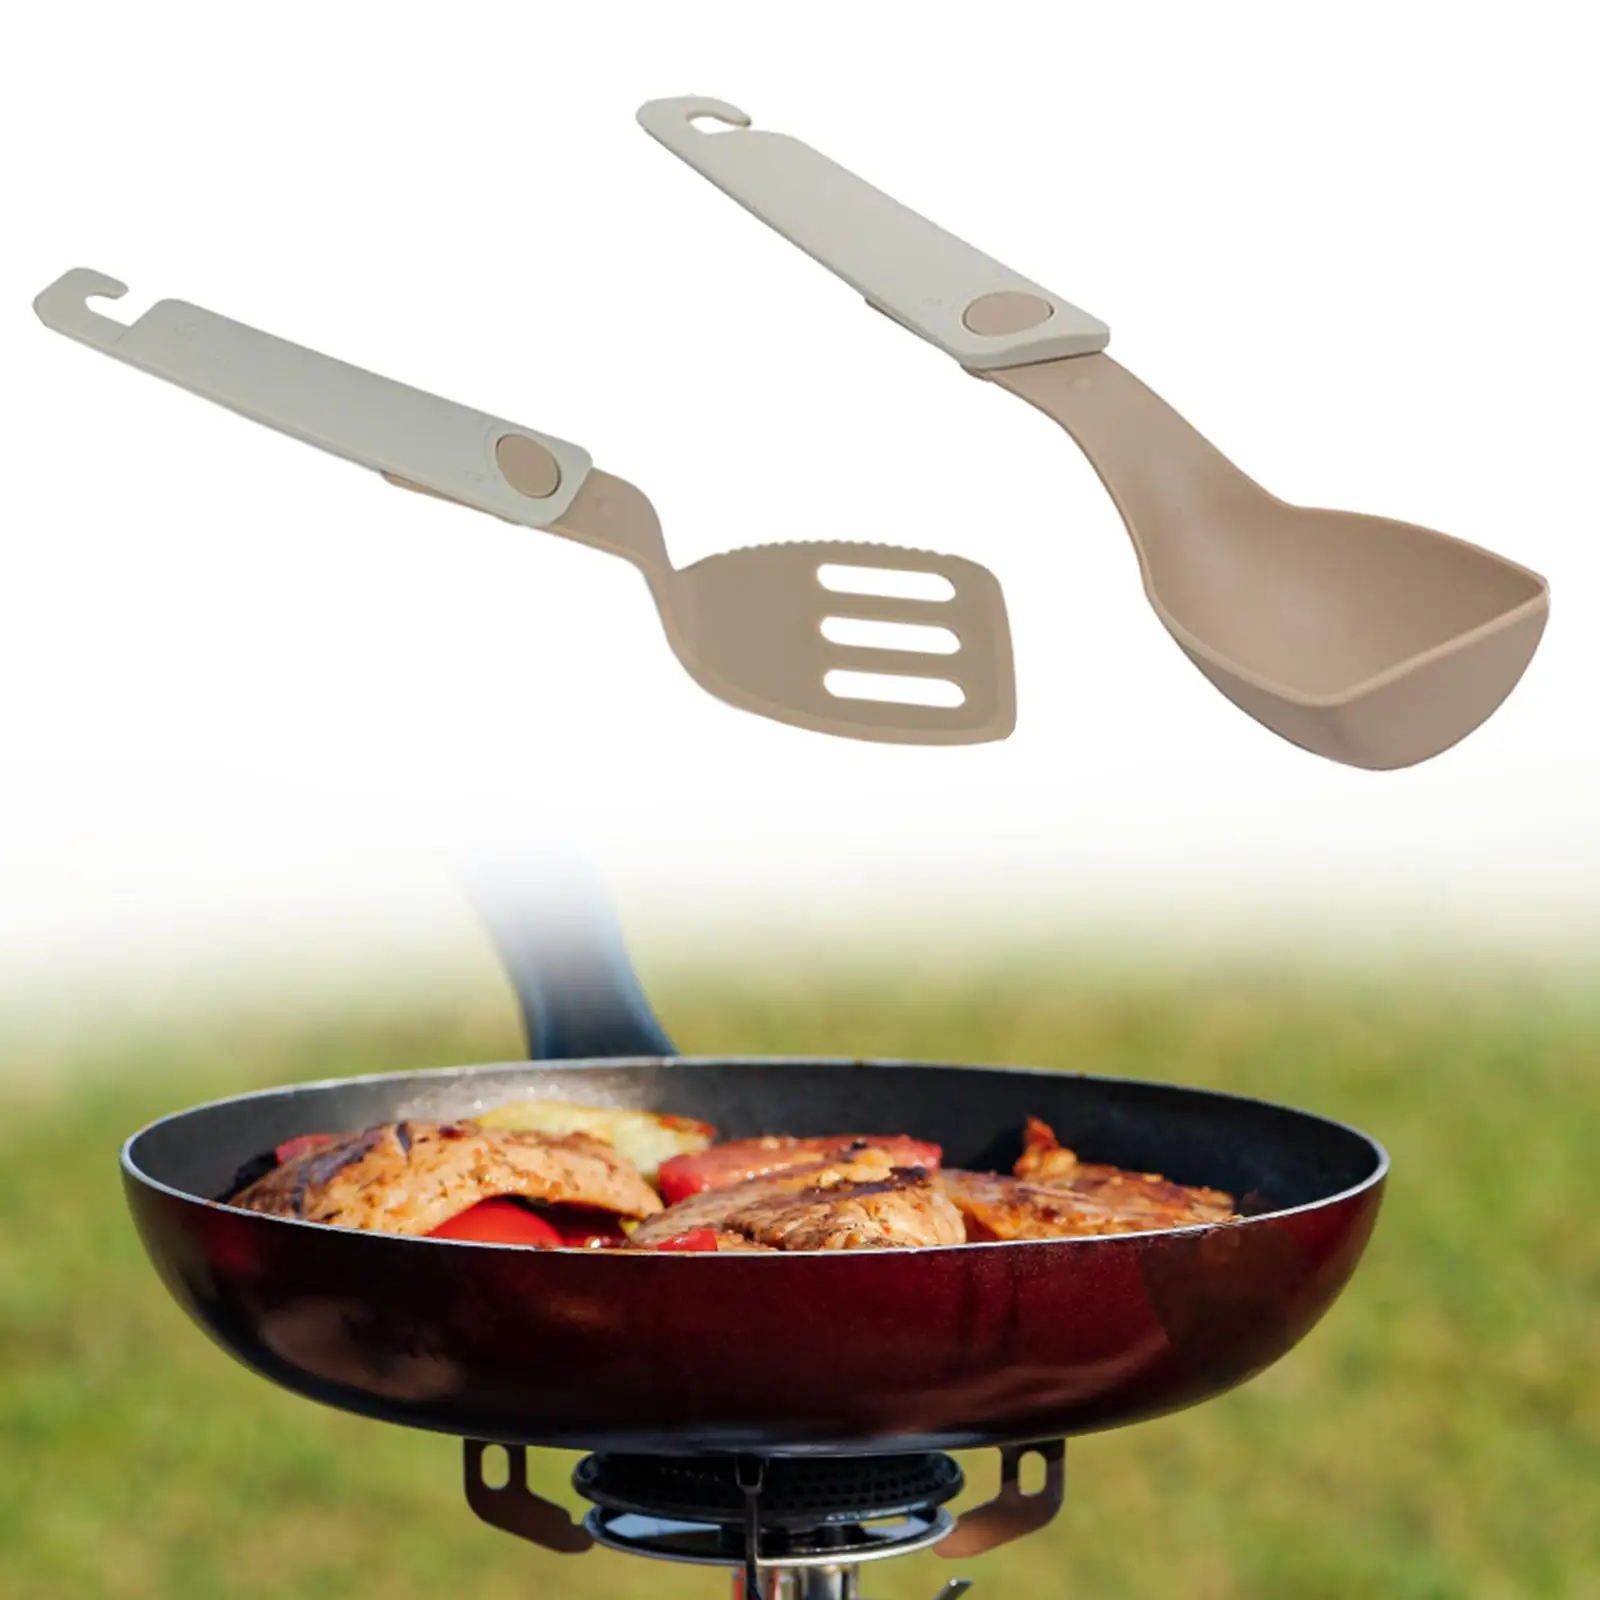 Outdoor Tableware Foldable Portable Cooking Utensil Camping Cutlery Cookware Flatware for Barbecue Kitchen Hiking BBQ